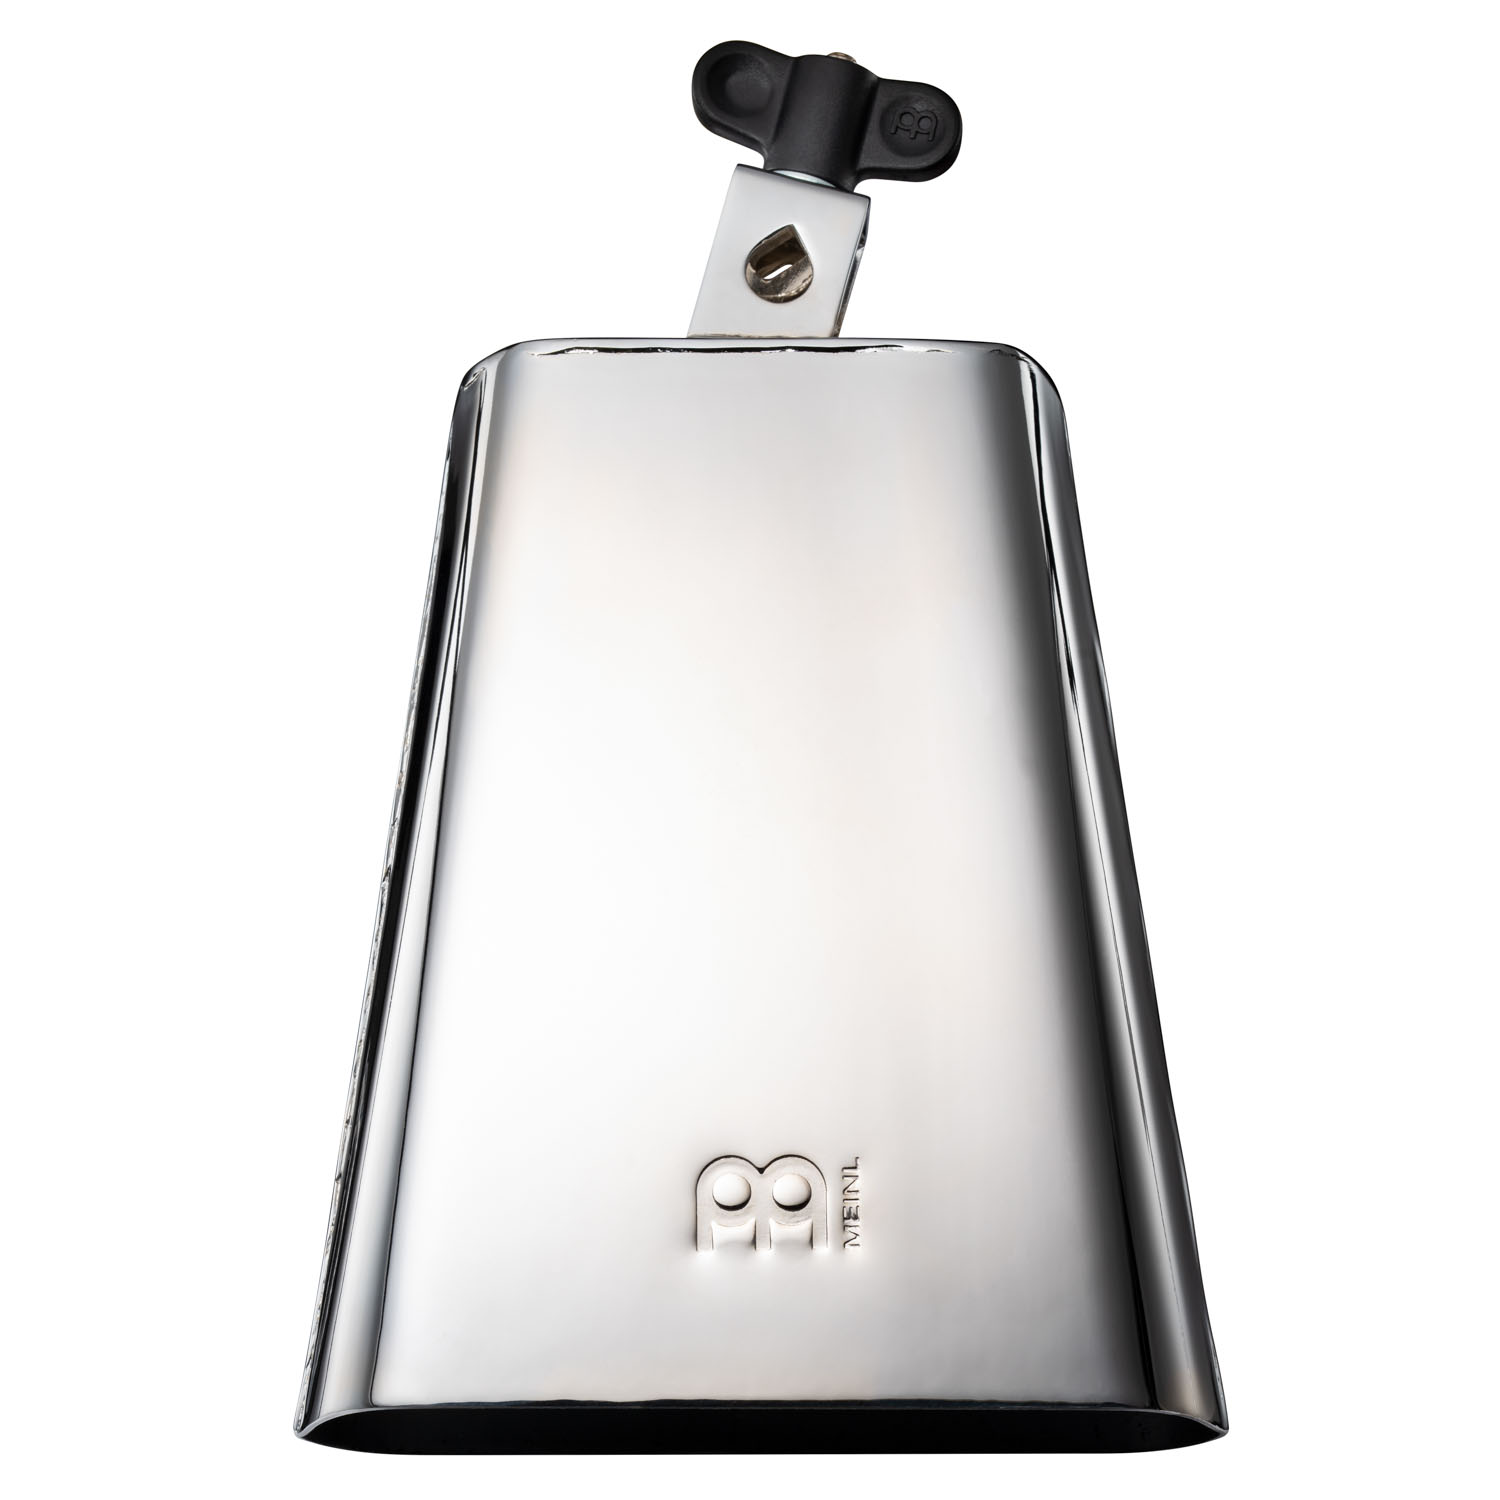 Meinl STB750-CH 7 1/2 Salsa Timbales Cowbell, Chrome Finish"